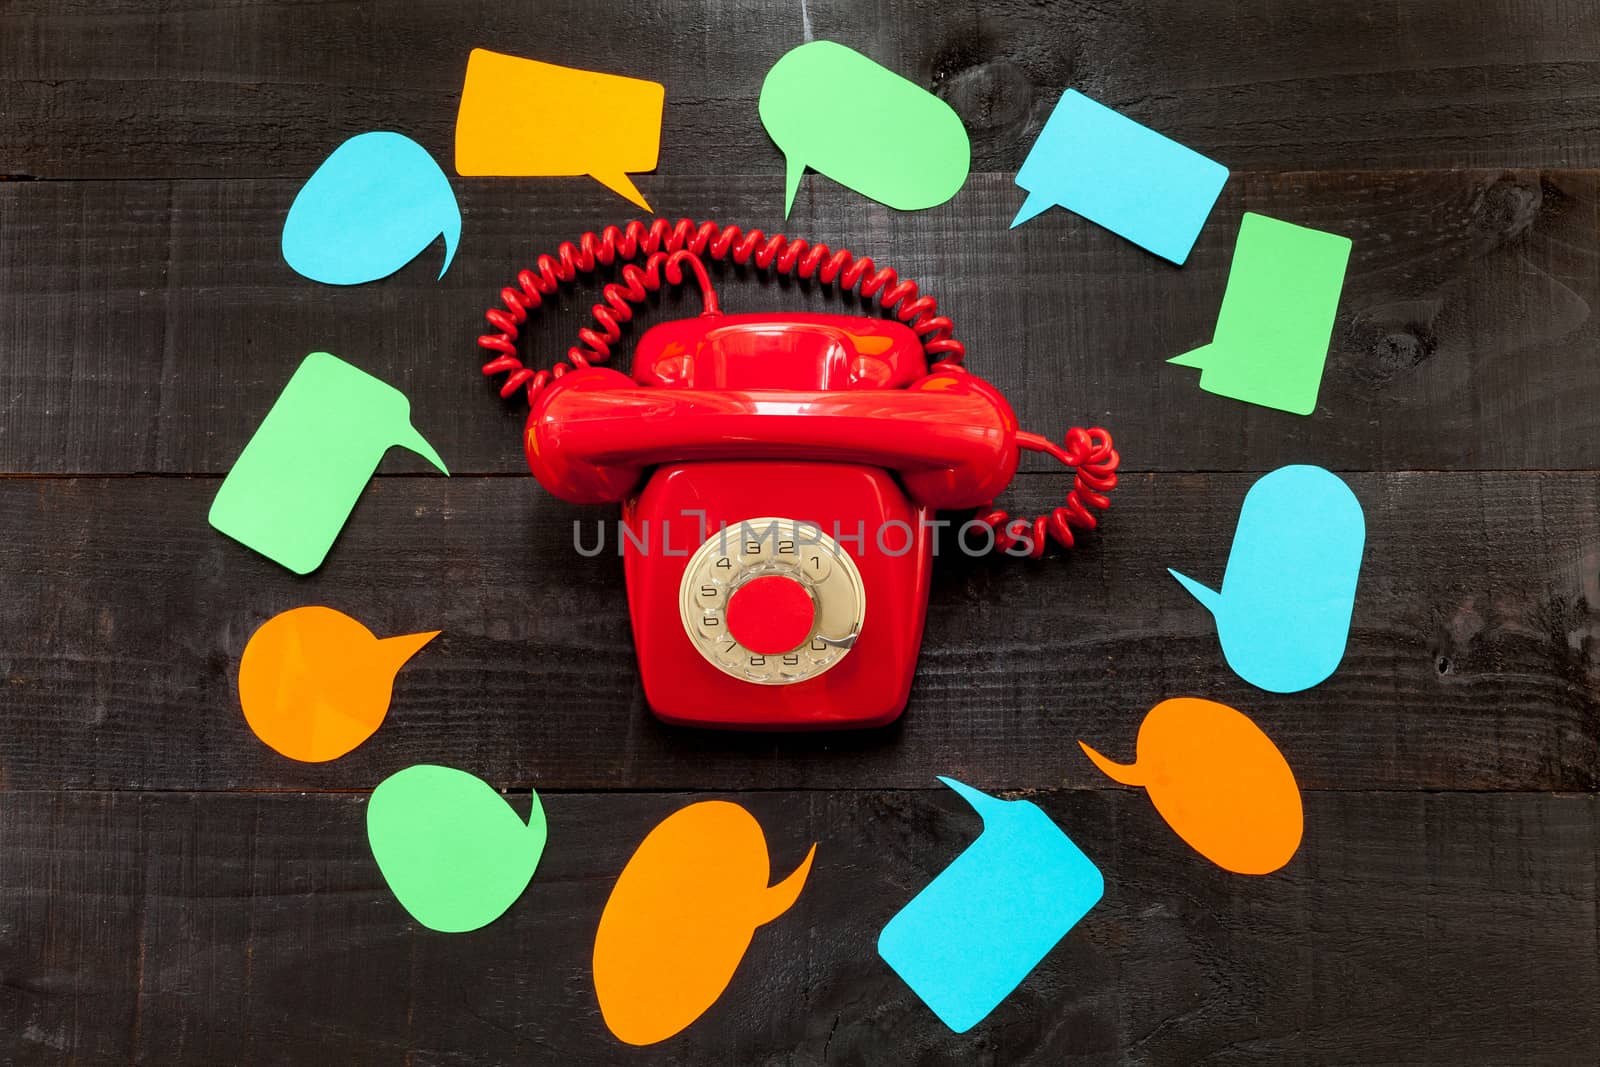 The telephone and the speech ballons by andongob